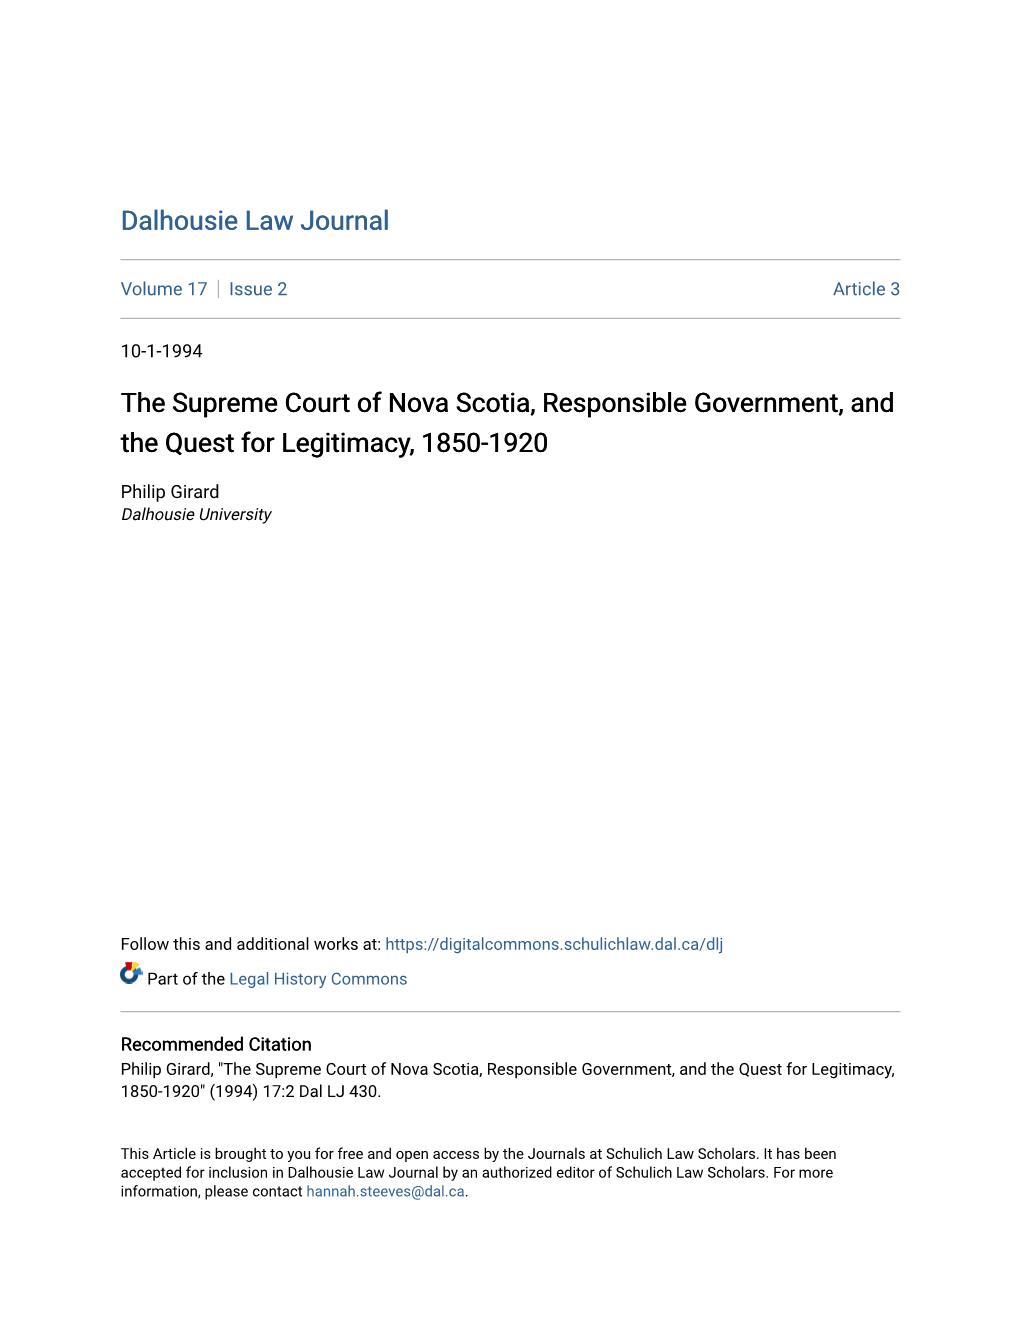 The Supreme Court of Nova Scotia, Responsible Government, and the Quest for Legitimacy, 1850-1920